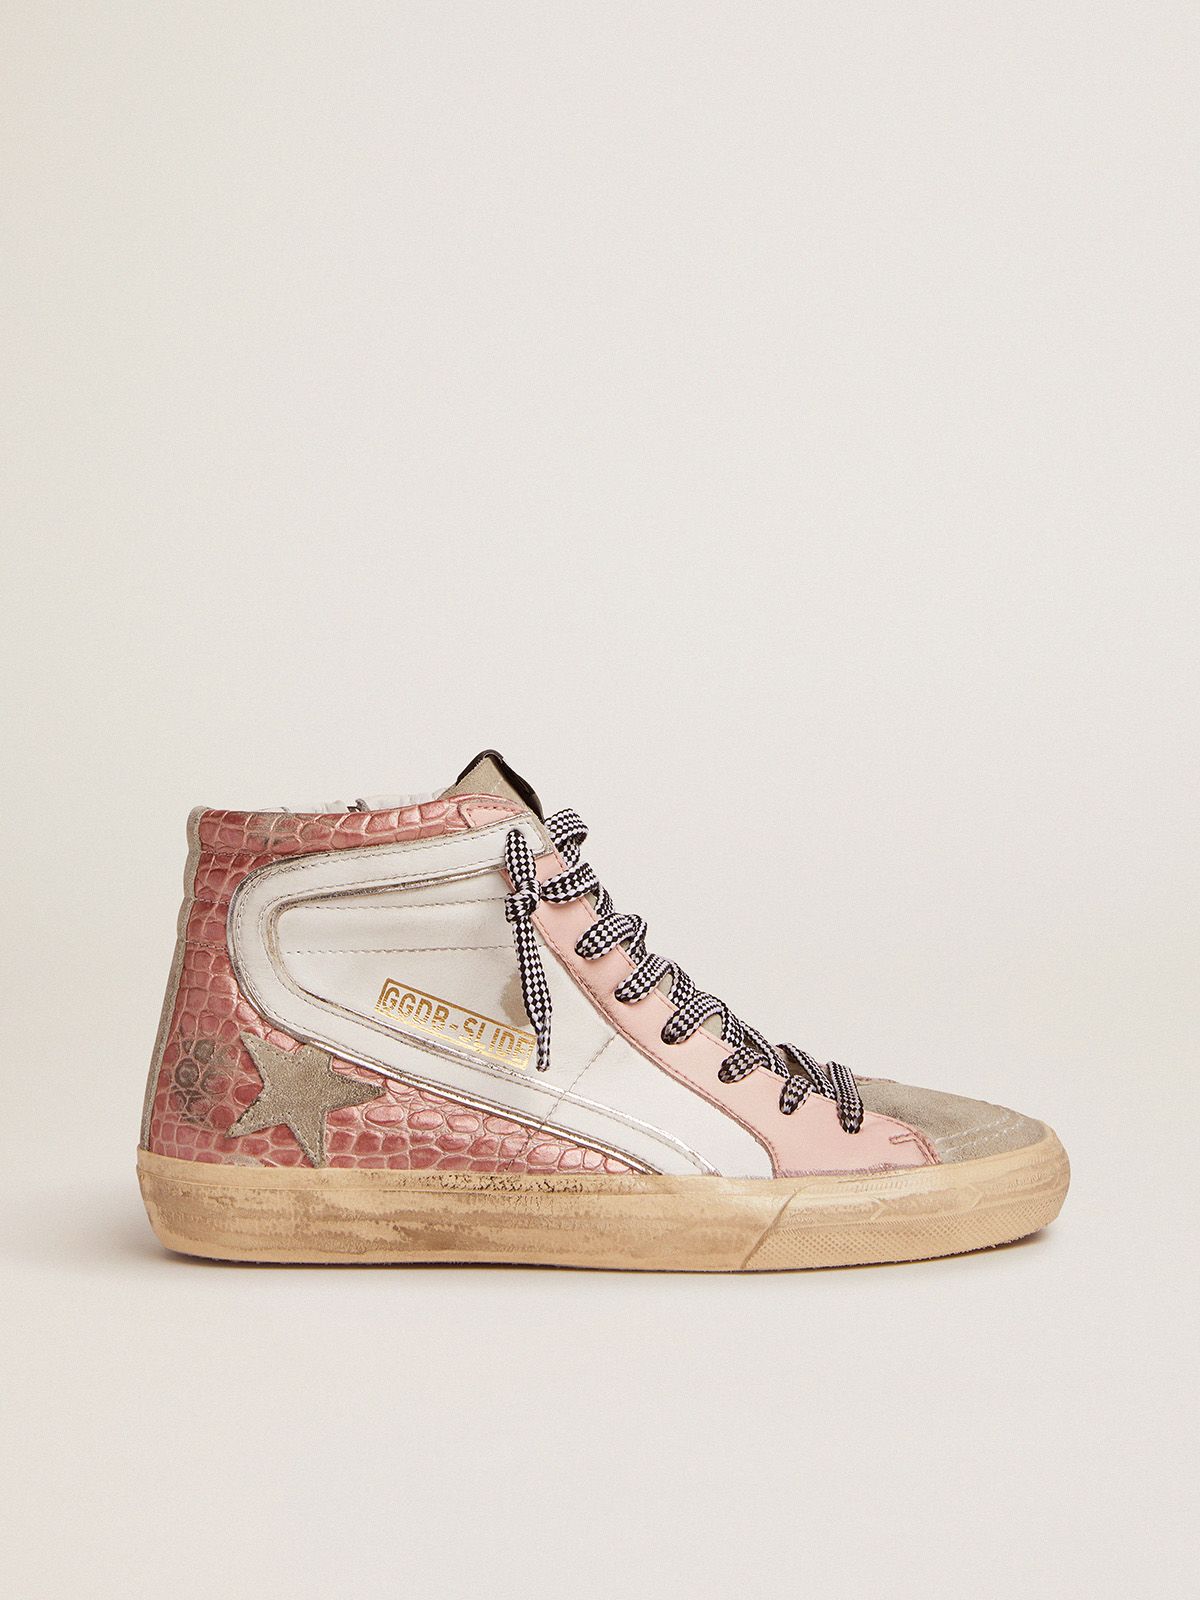 golden goose pink crocodile-print with leather Slide upper sneakers white and